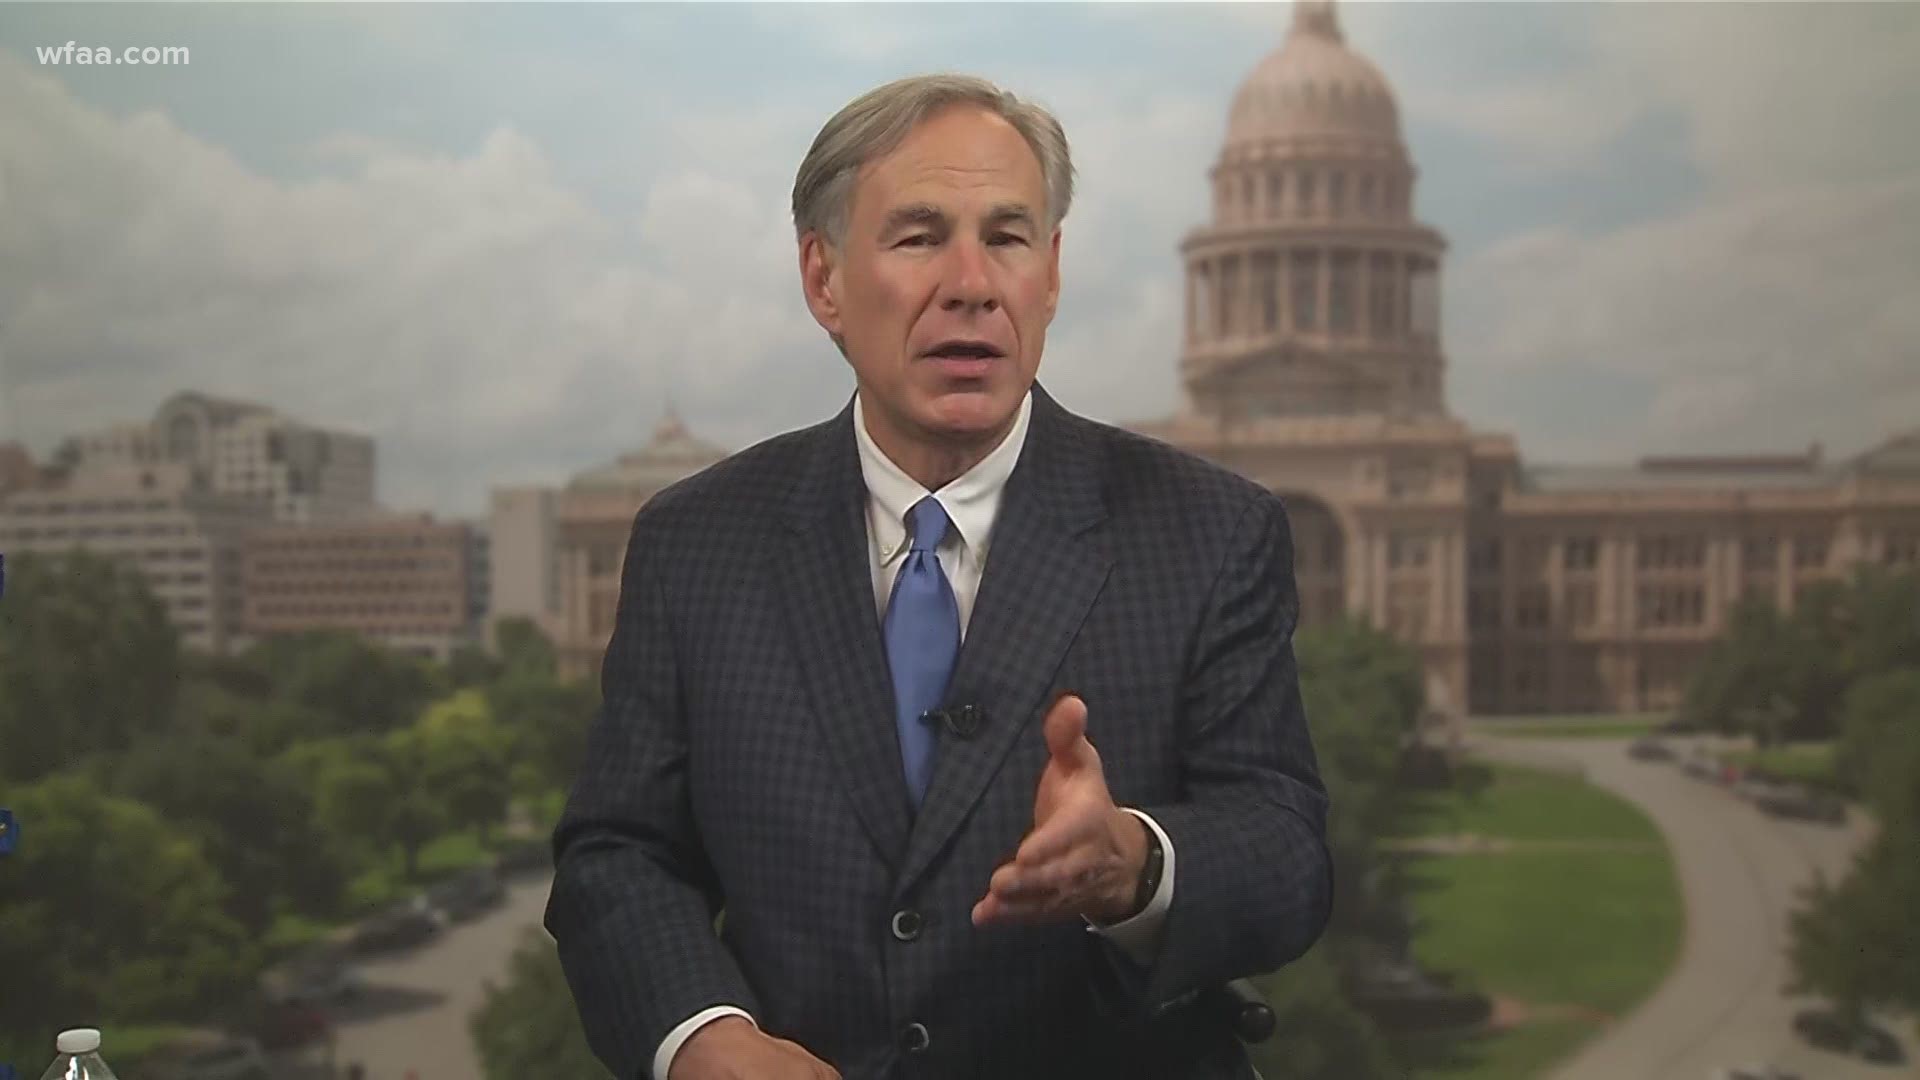 Gov. Abbott answer questions over steps to take to keep Texas open and to keep students safe when they go back to school or engage in online learning this fall